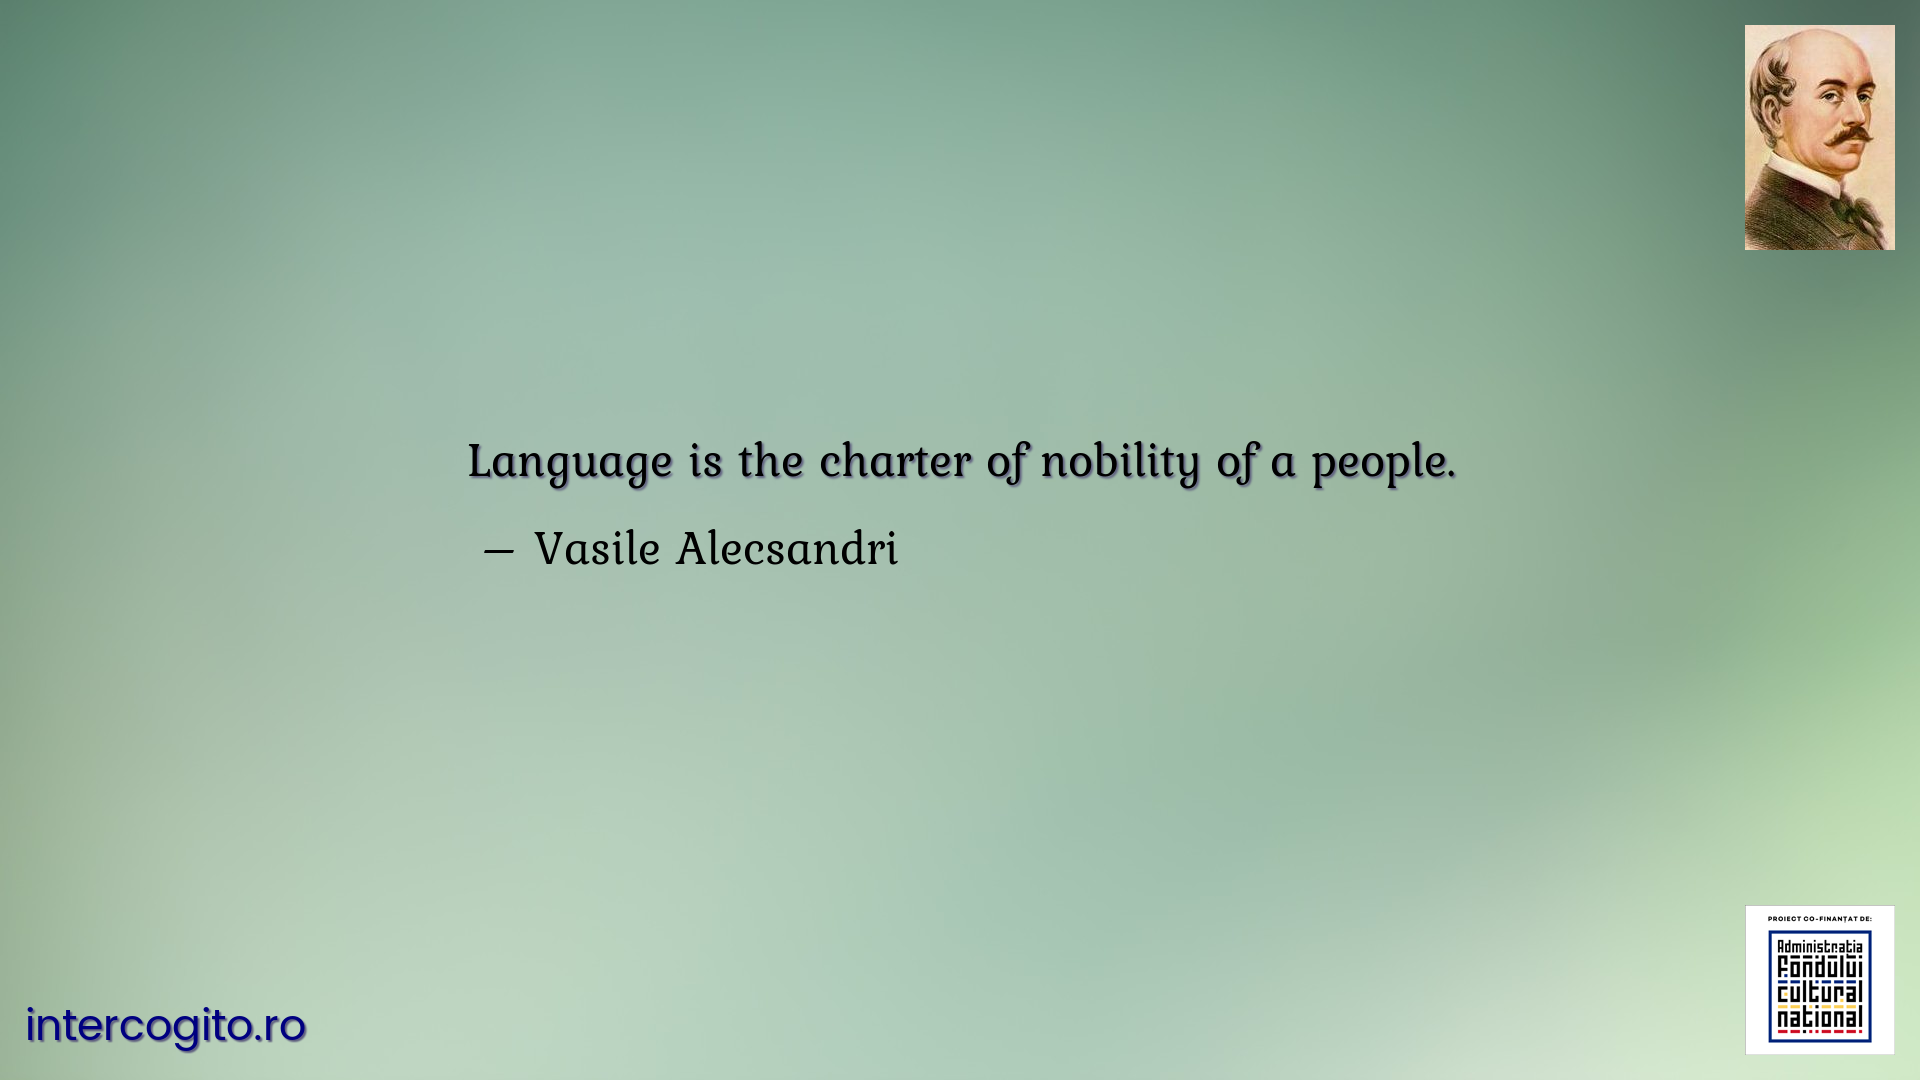 Language is the charter of nobility of a people.